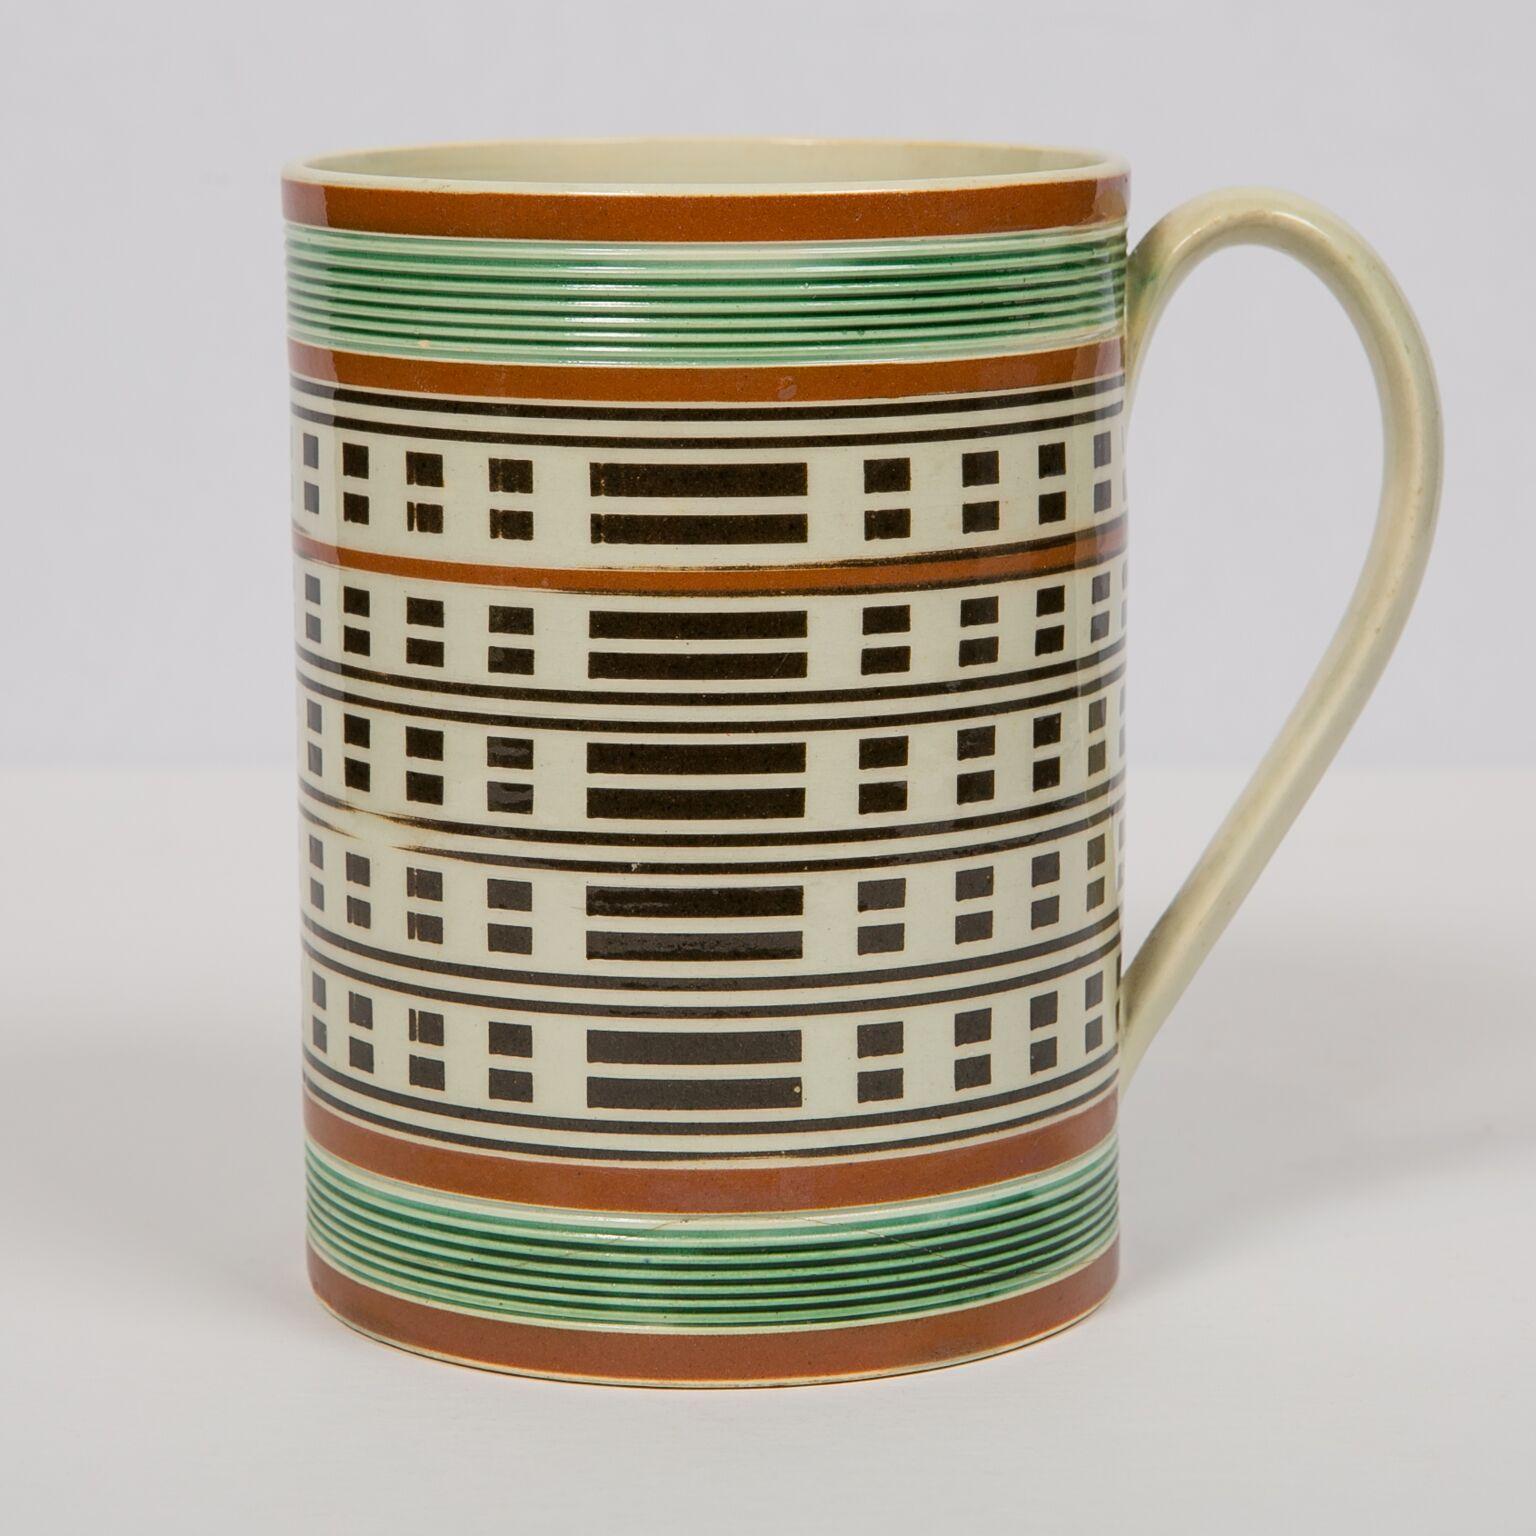 An antique mochaware mug made in England circa 1815. Decorated with green glazed rouletting, bands of brown slip, and engine turning black slip in a design of dots and dashes,
Mocha decorated pottery is slip-decorated, lathe-turned, earthenware with